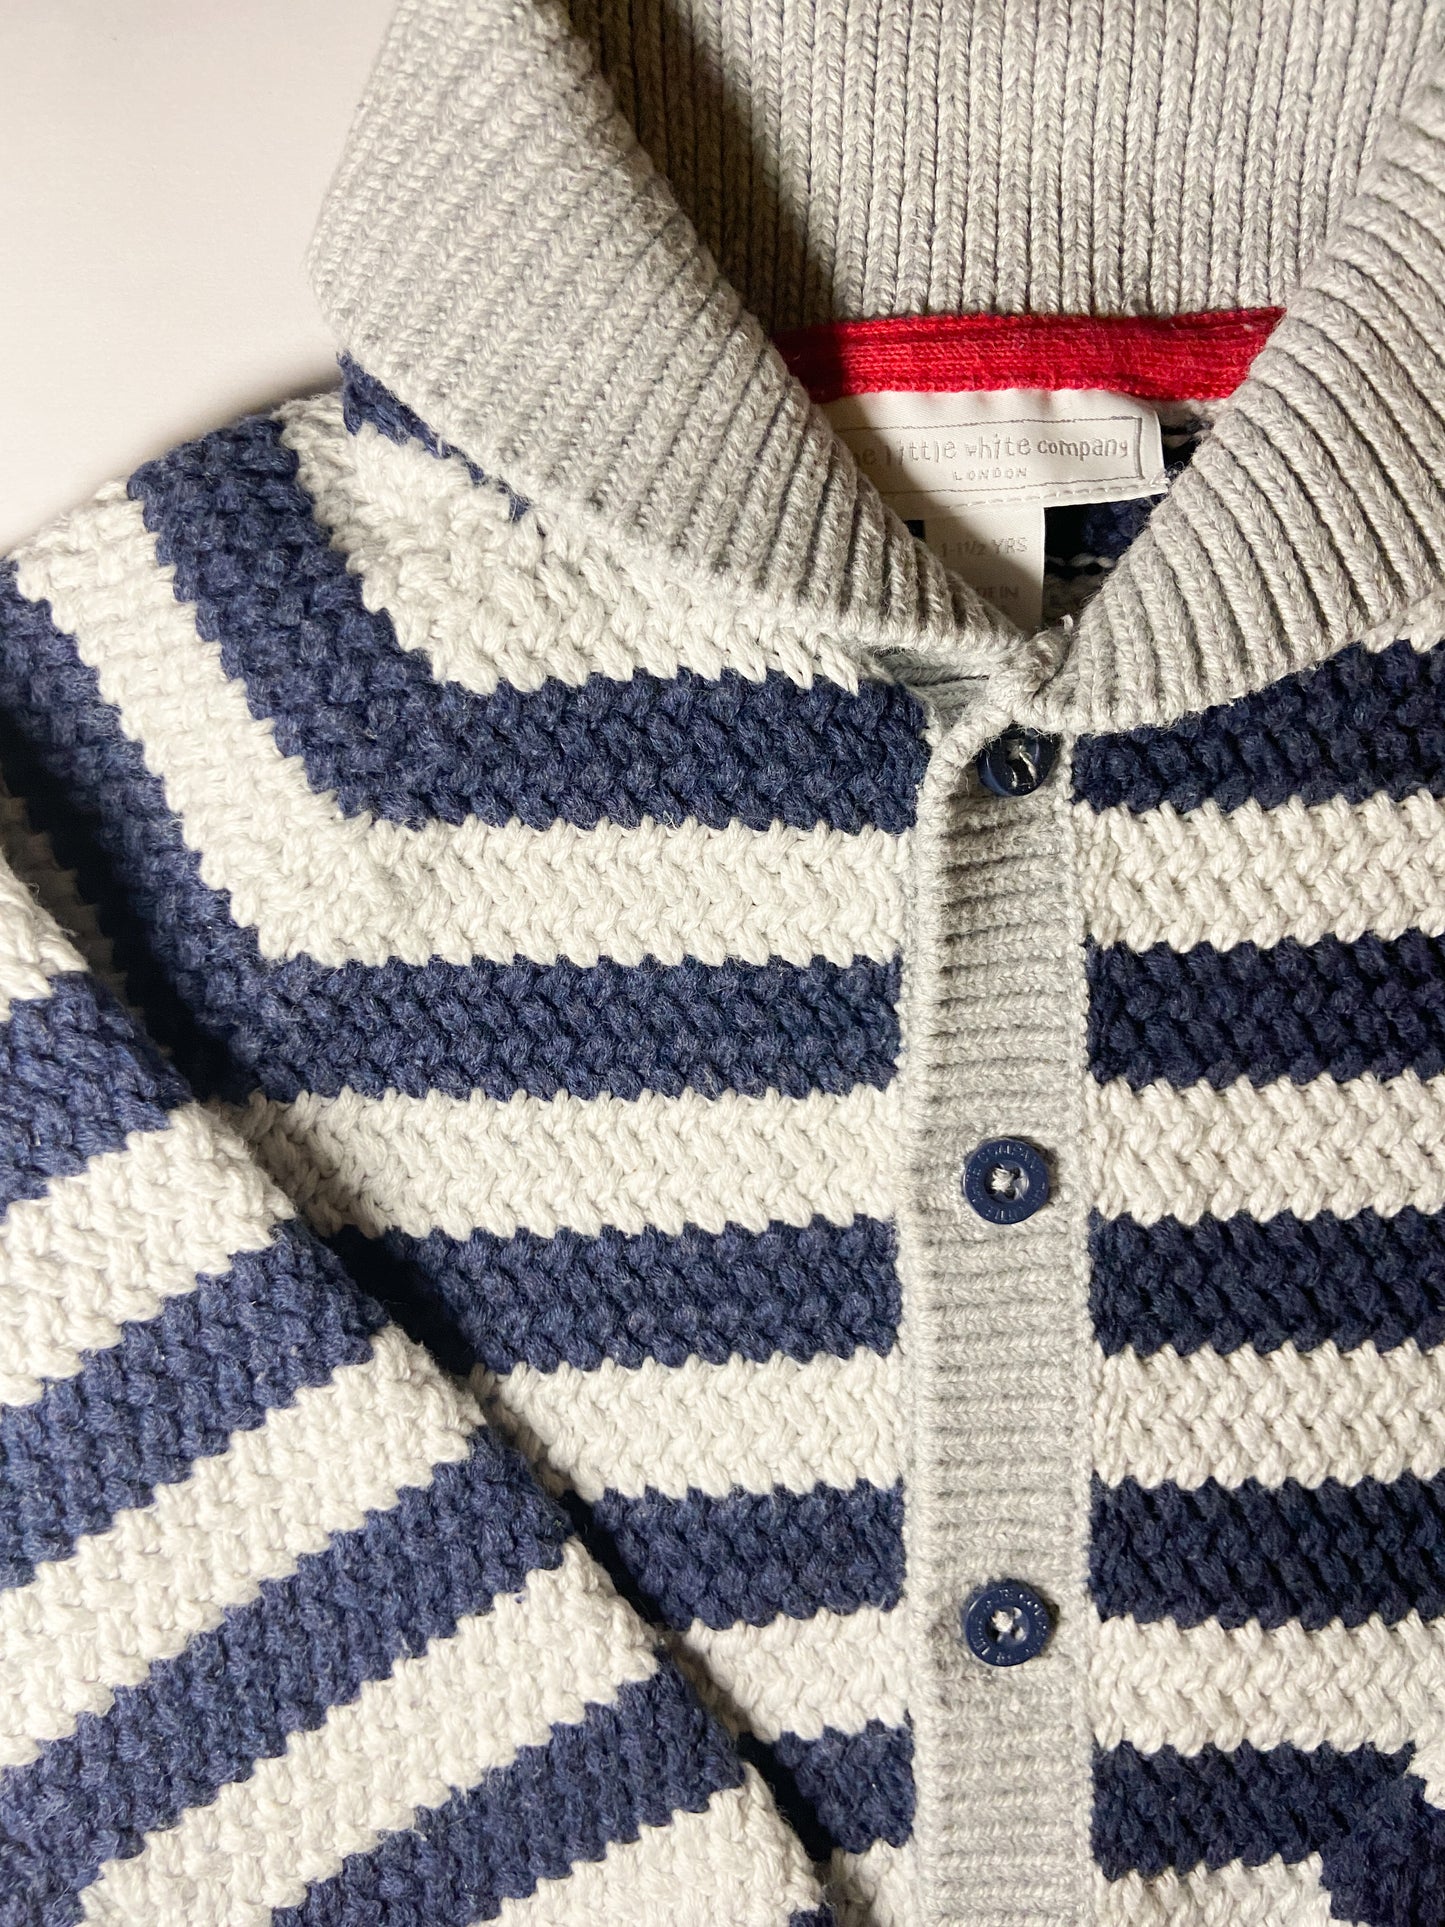 12-18 M Chunky knitted cardigan